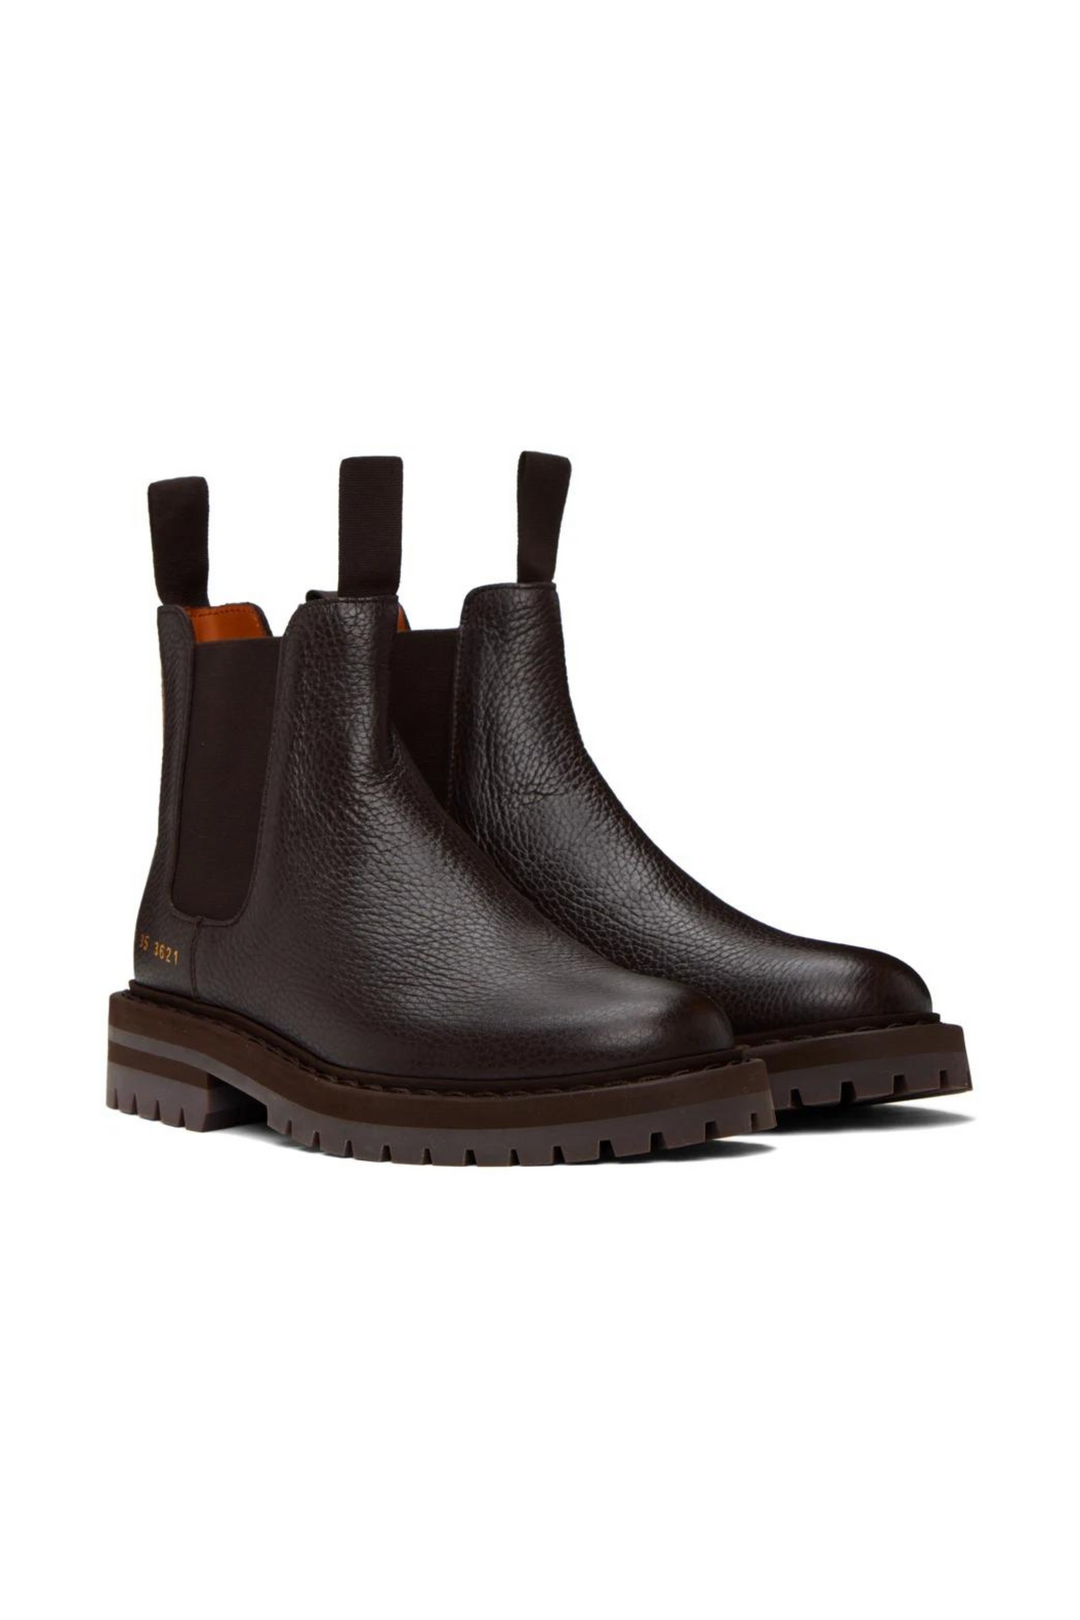 Common Projects Chelsea Boot in Brown Leather